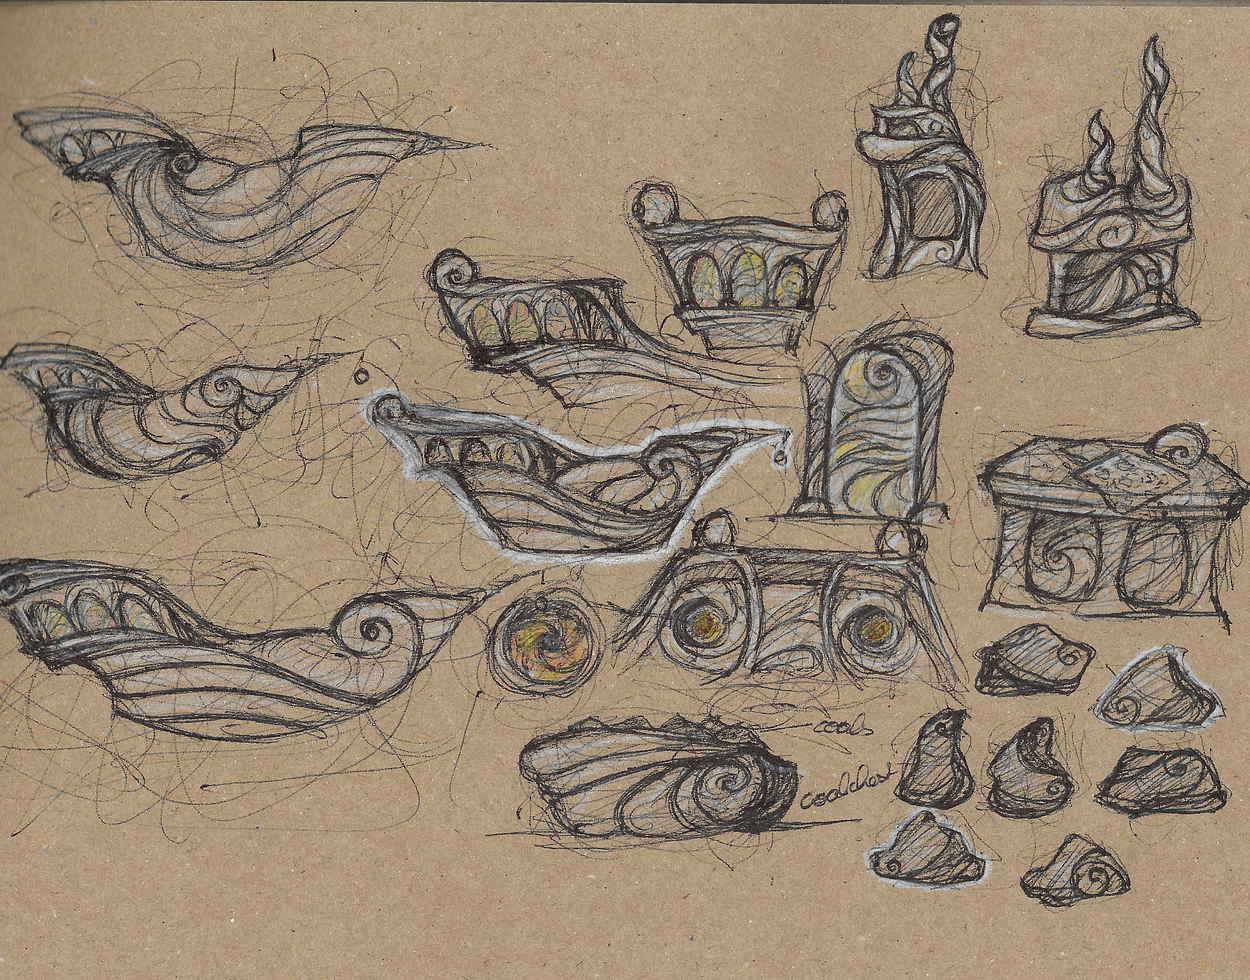 Some new Concepts for the ship design to suit our new style